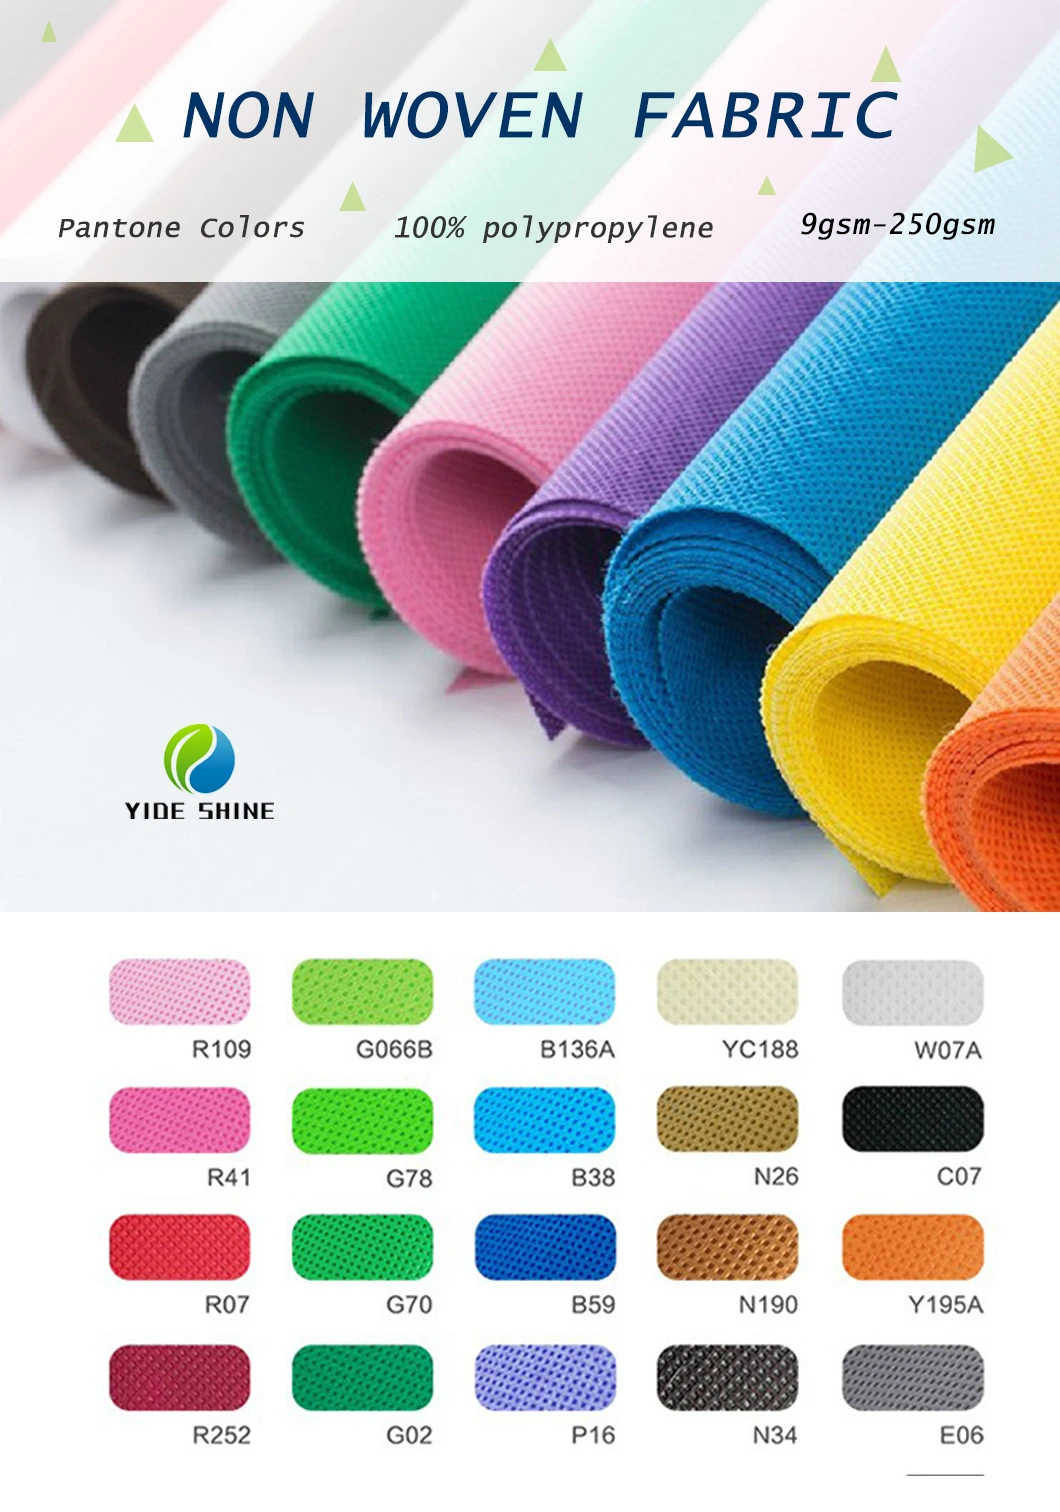 Factory Wholesale Face Masked and Gowns Non Woven Supplier Polypropylene Nonwoven Roll Fabric Raw Materials Nonwoven Fabric